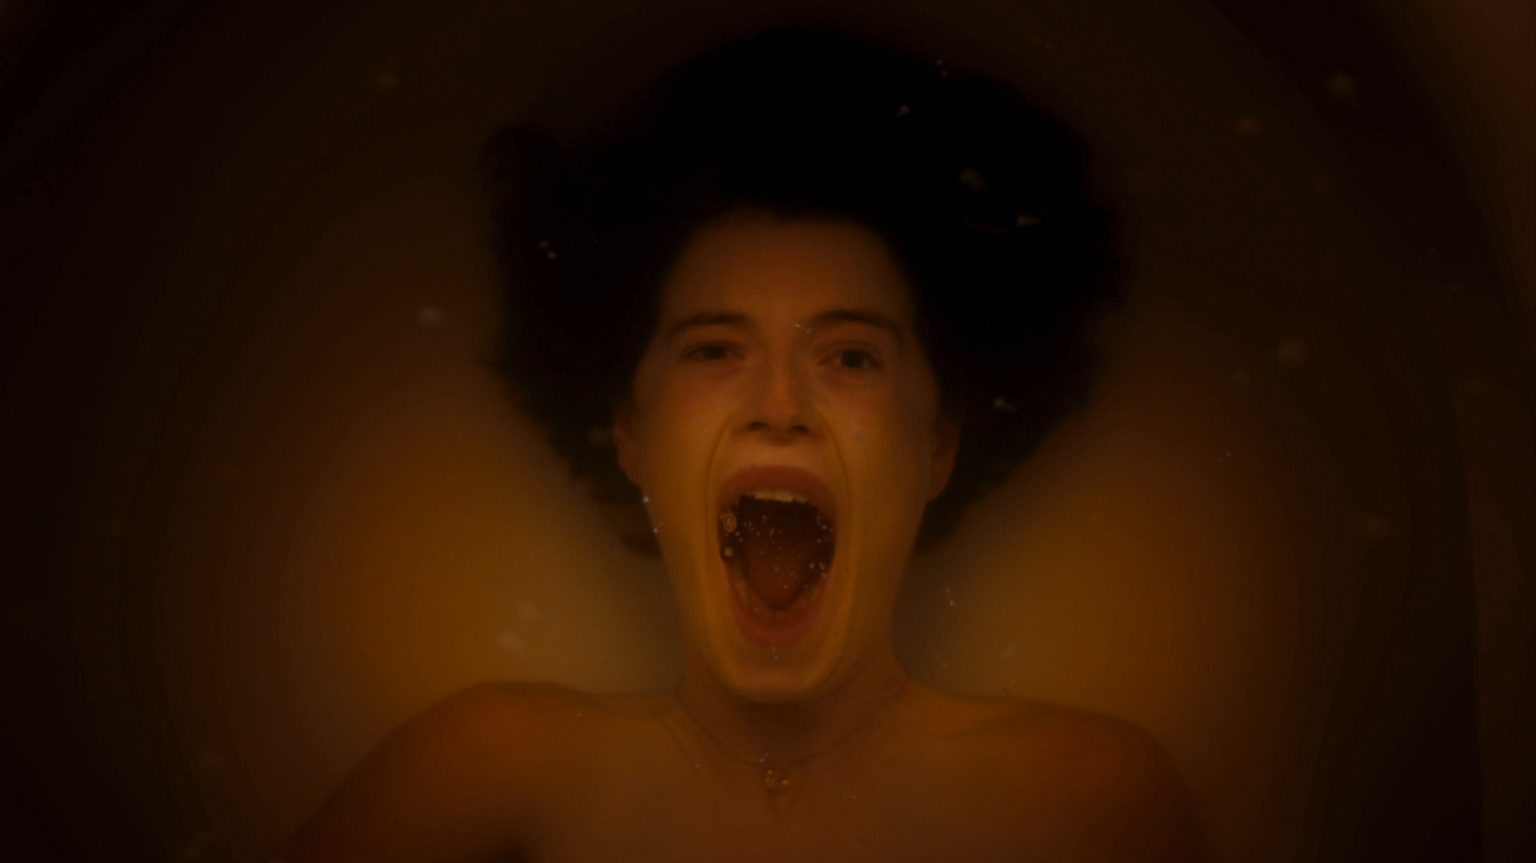 Jesse Buckley yells in terror with her mouth wide open while she drowns underwater in a bathtub naked in the A24 arthouse horror film MEN directed by Alex Garland.